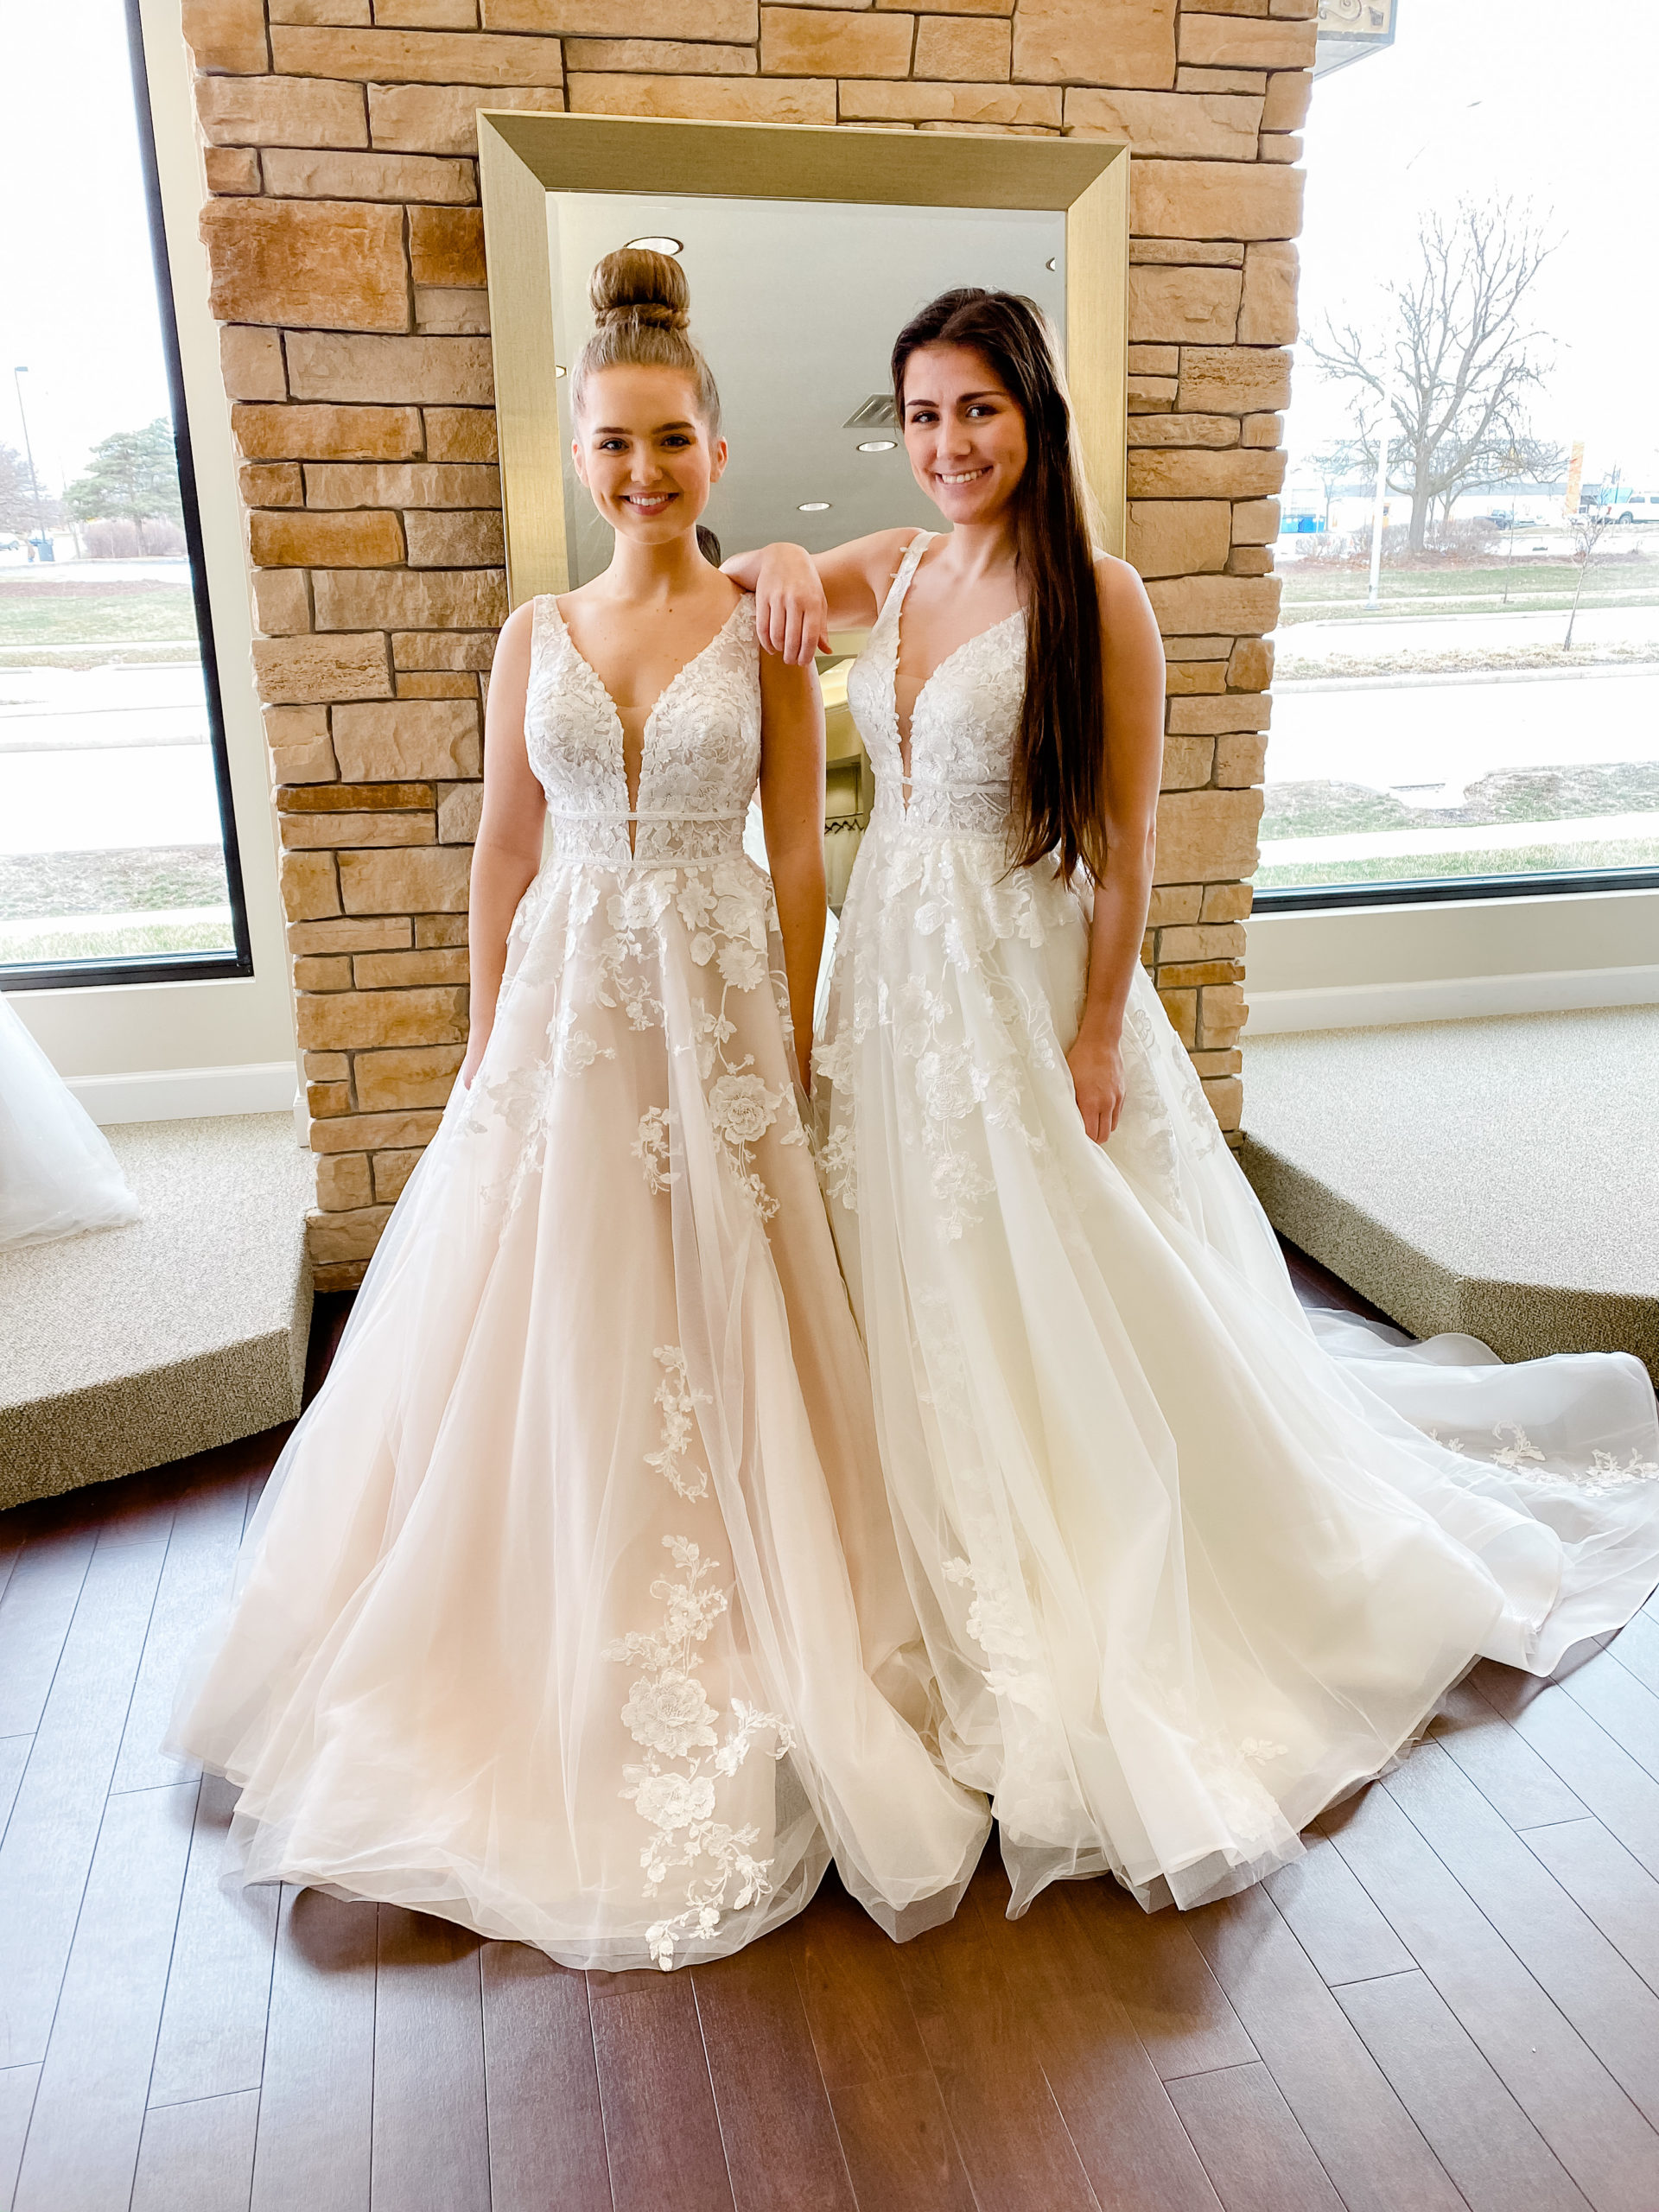 Do Wedding Dresses Have to be White  Eivans Photography  Video